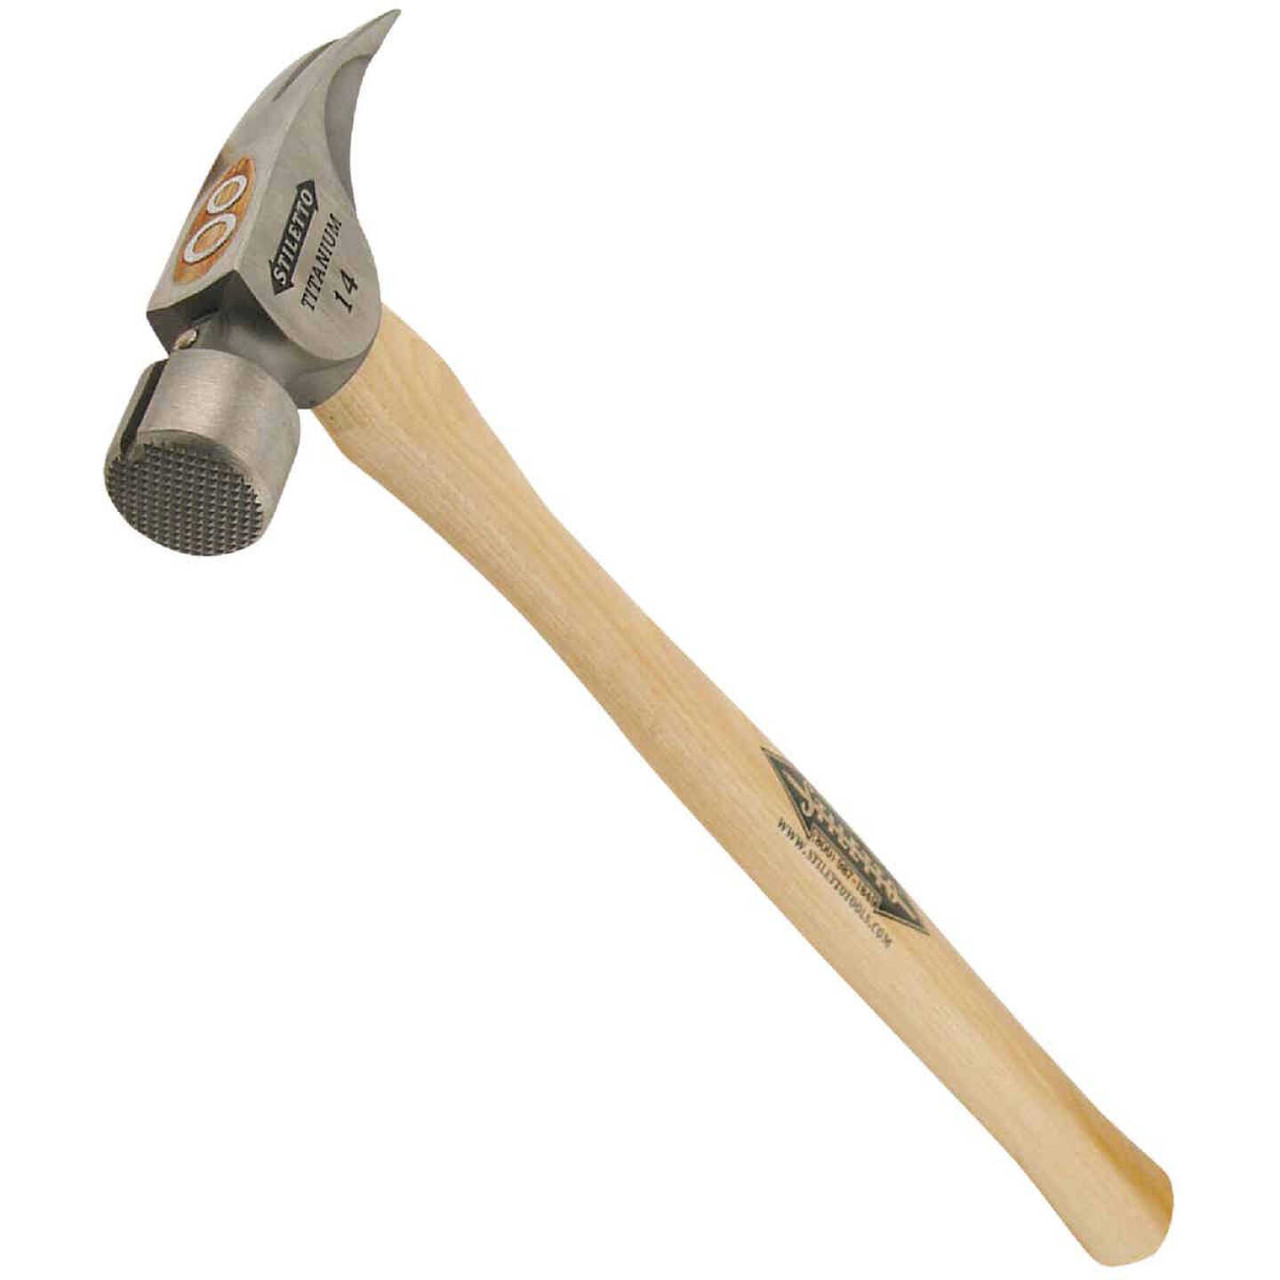 Stiletto 14 Oz. Milled-Face Framing Hammer with Straight Hickory Handle Stiletto 14 Oz. Milled-Face Framing Hammer with Straight Hickory Handle